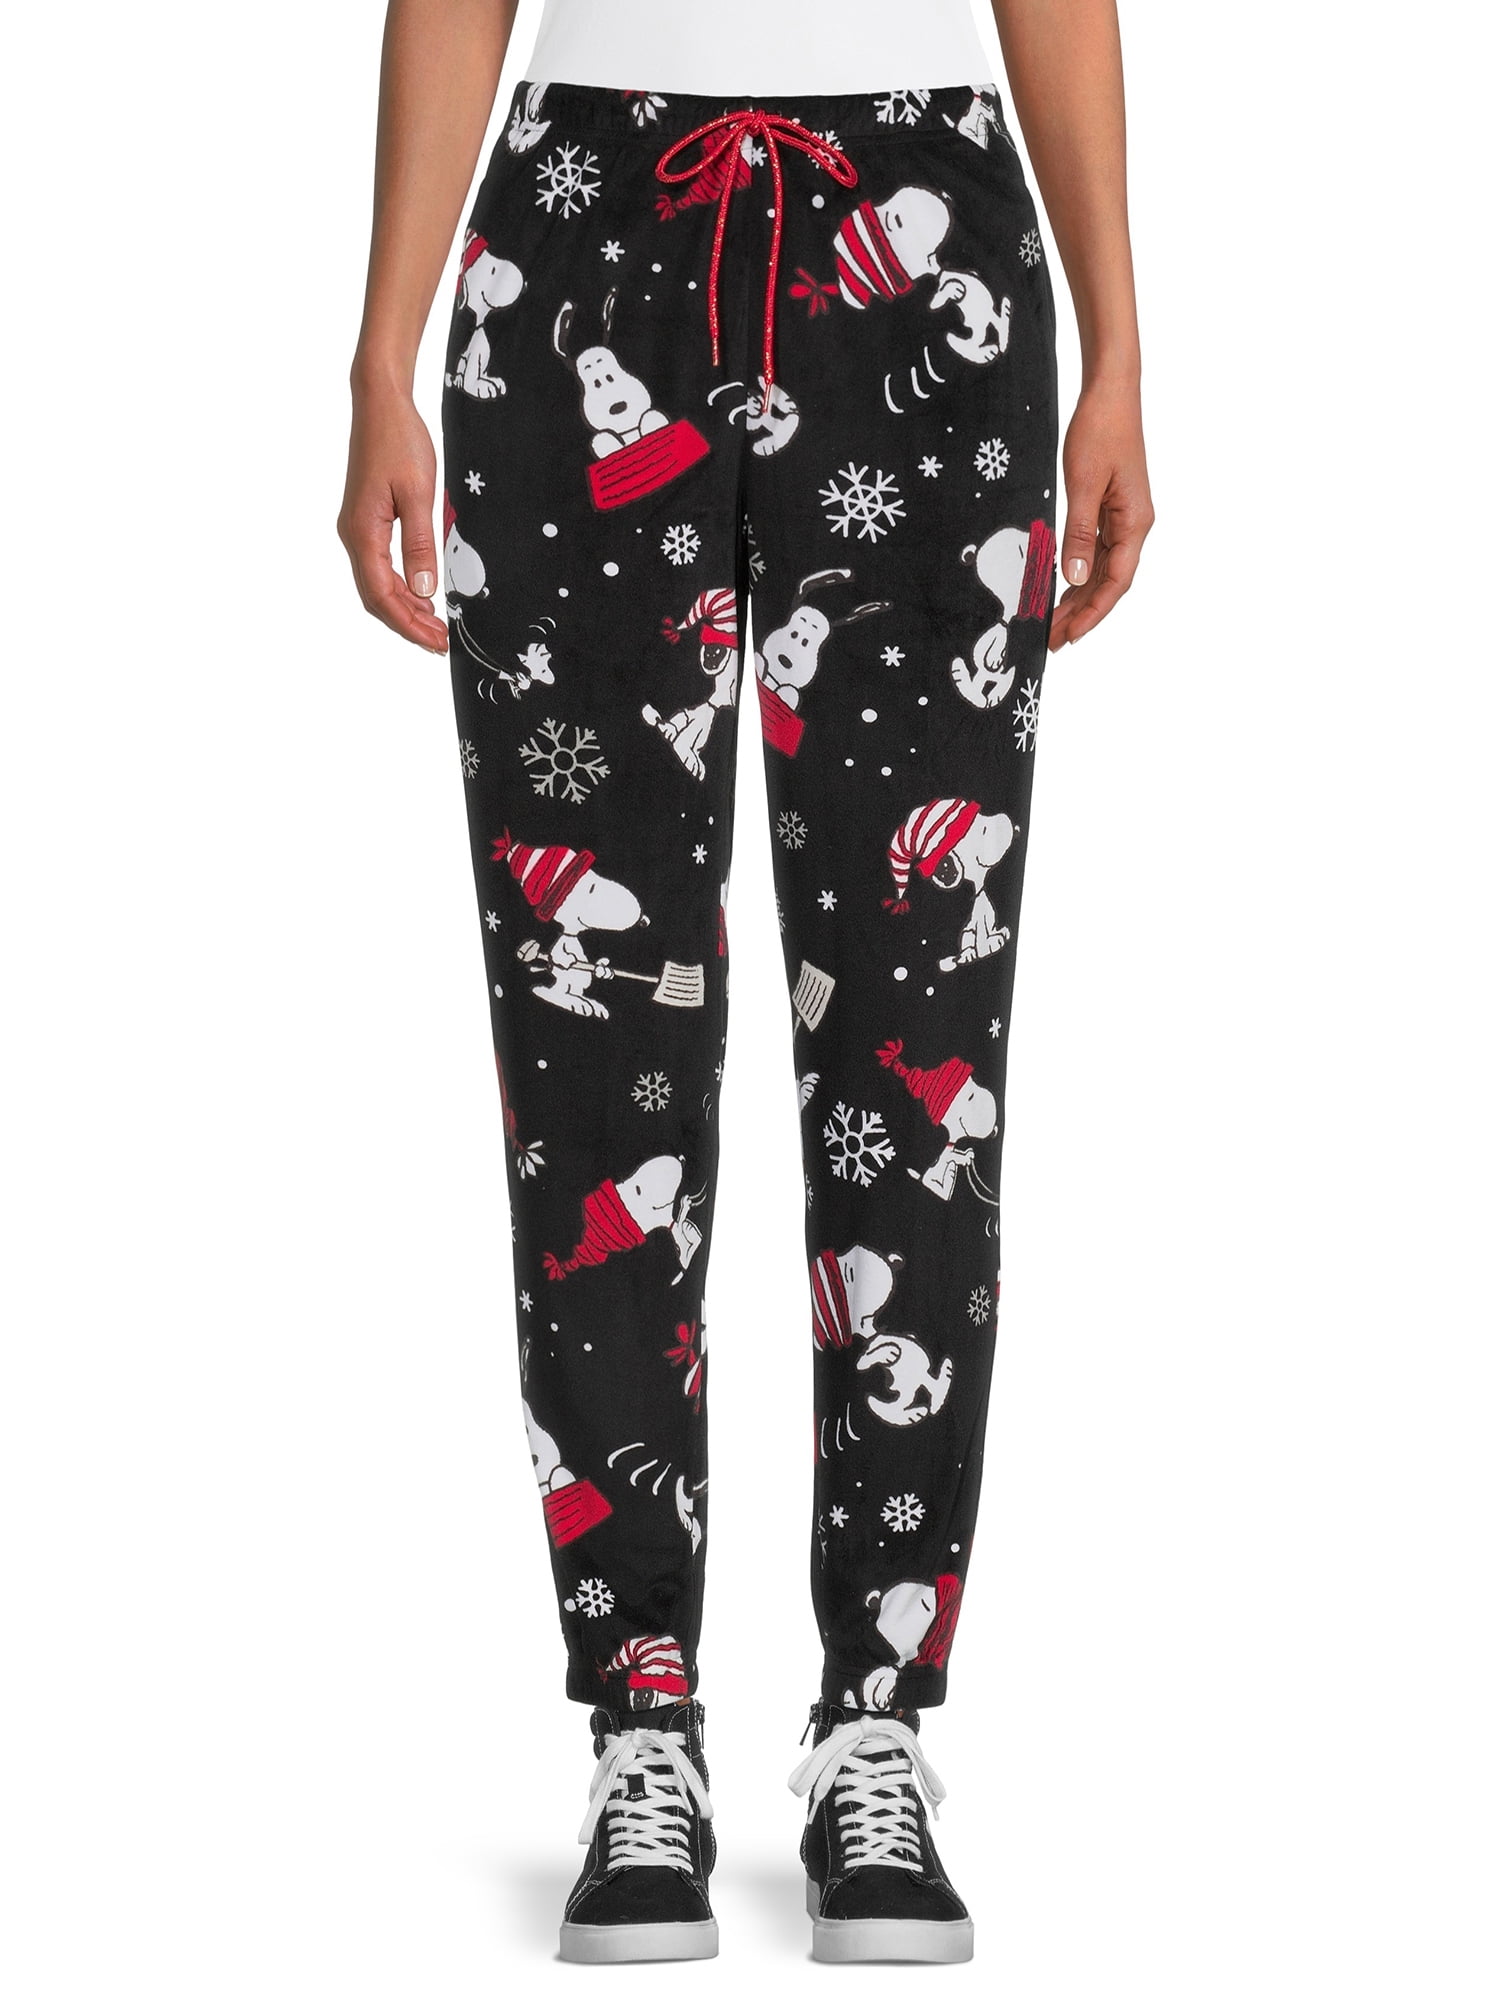 Peanuts Snoopy Women's and Women's Plus Holiday Sleep Jogger